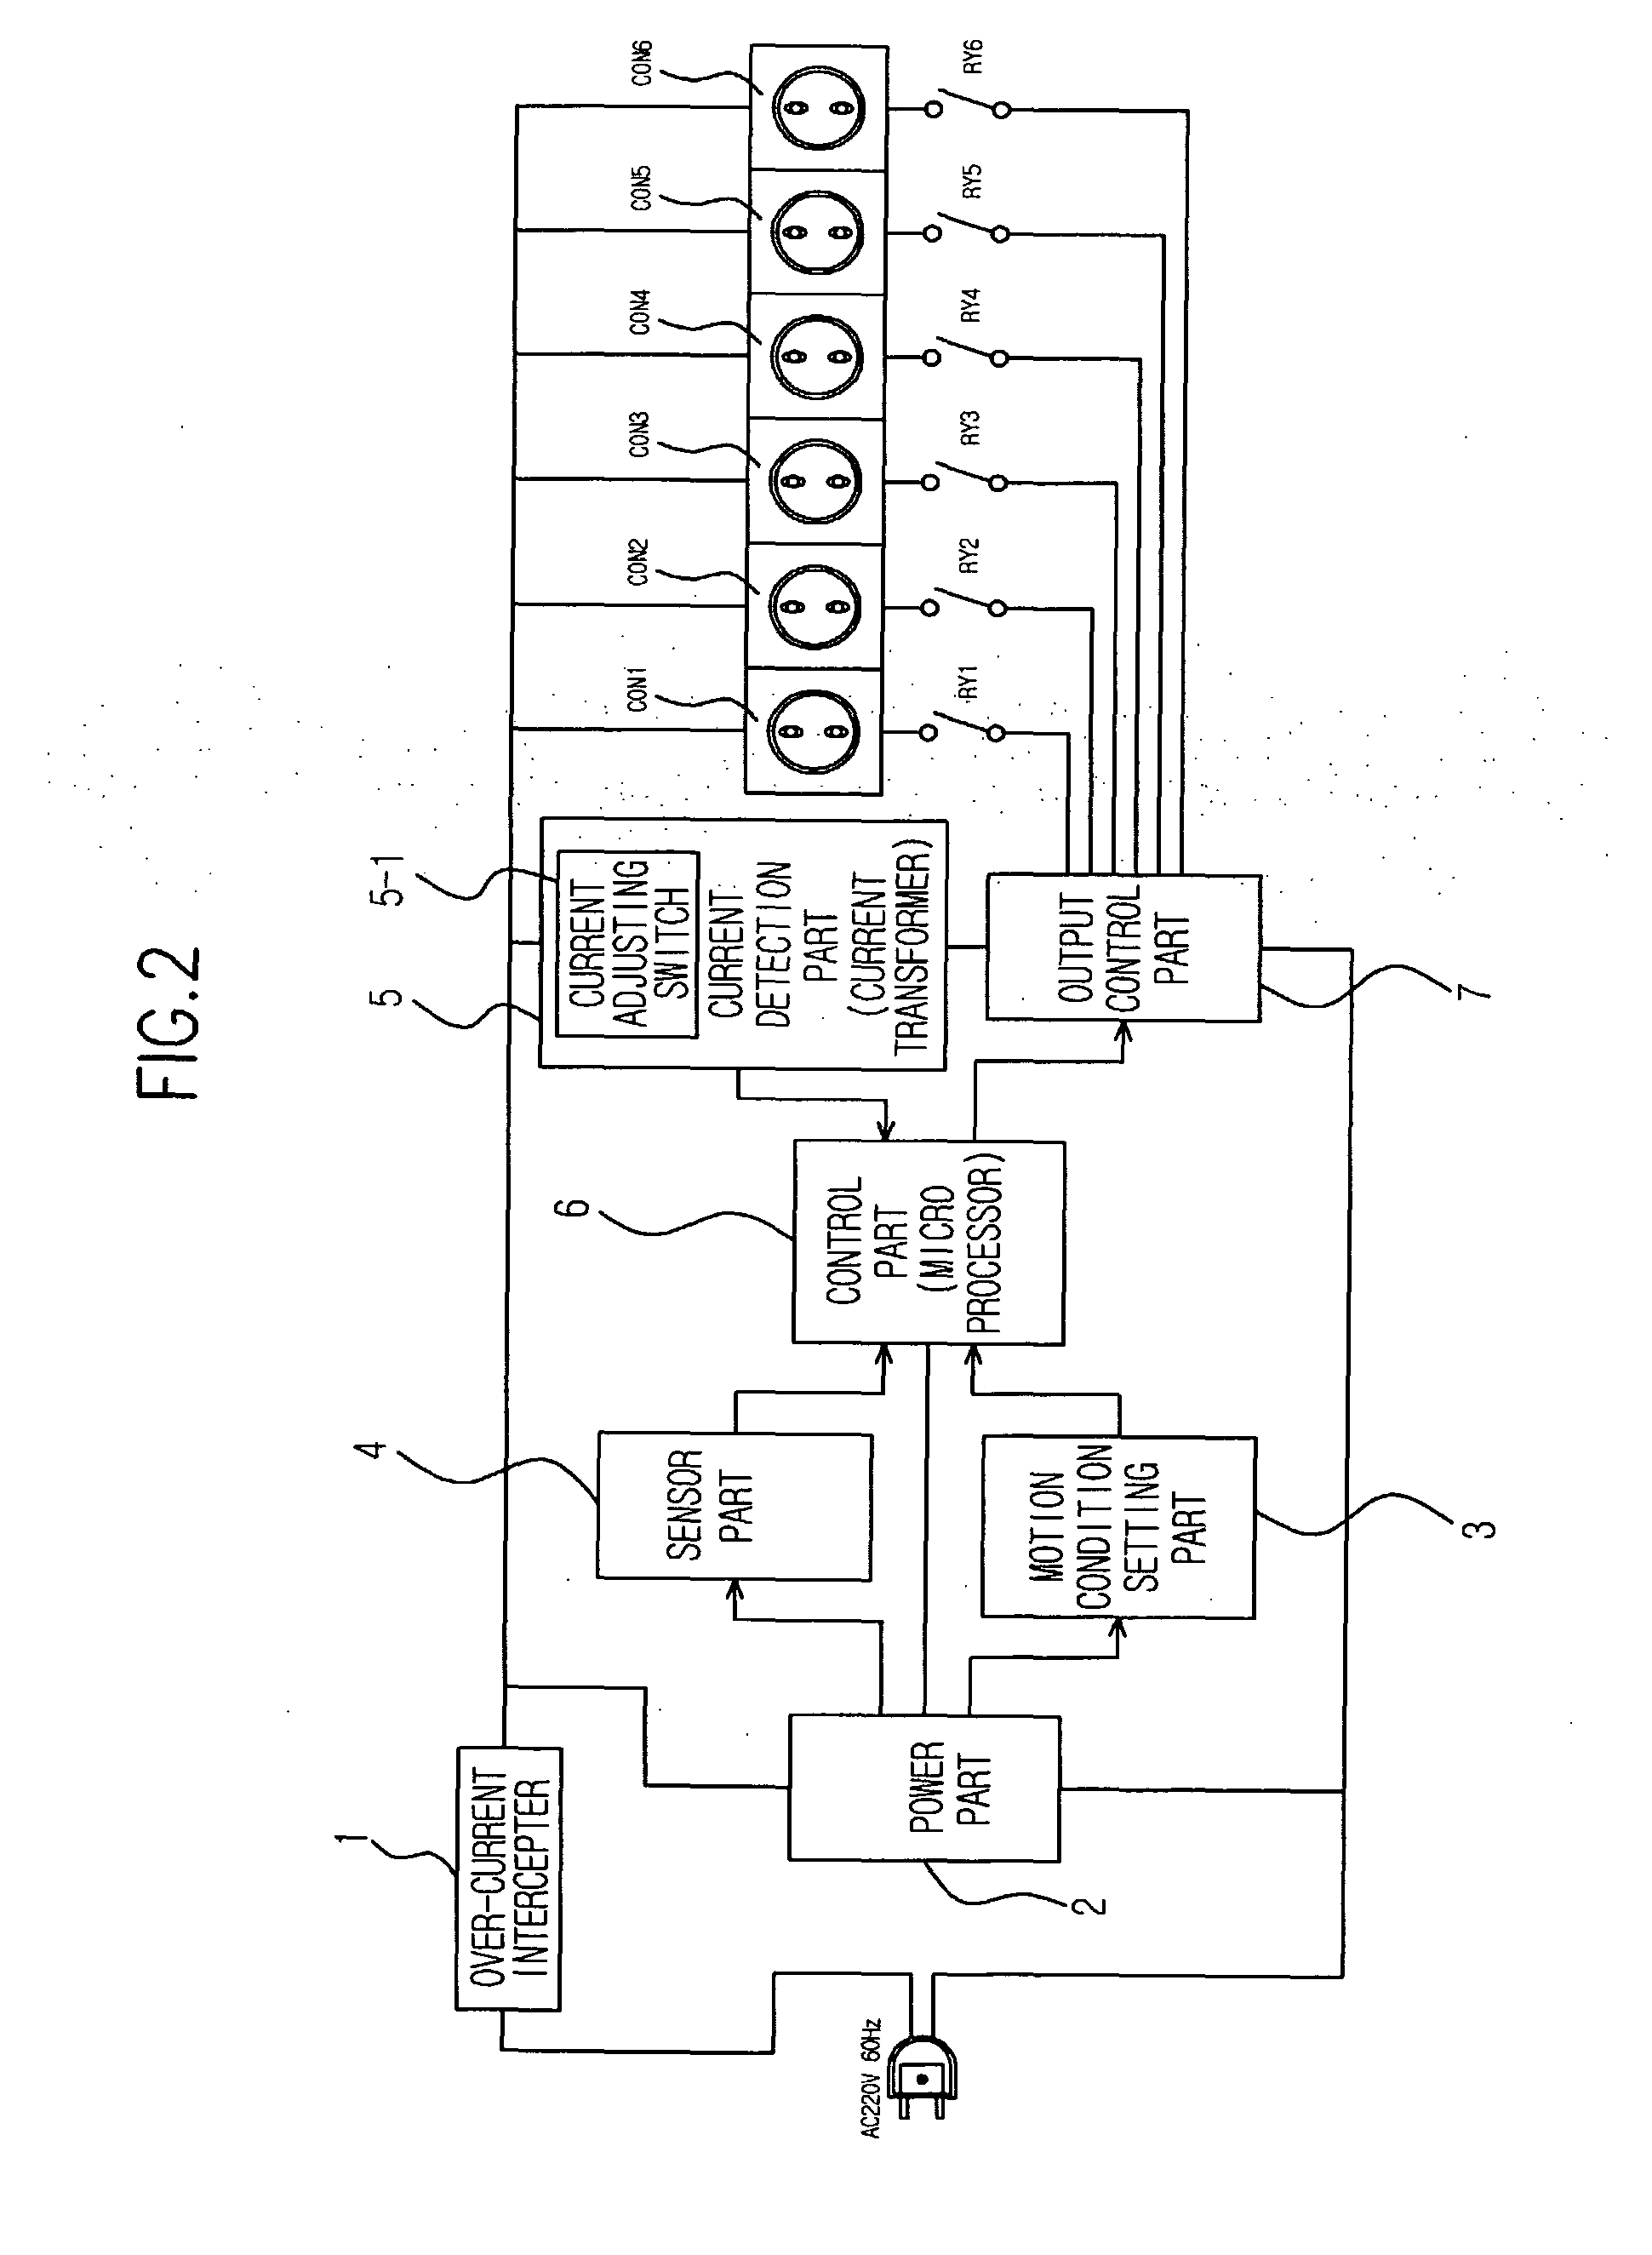 Multifunctional Multi-Outlet of Saving Electric Power and a Control Method Employing the Same